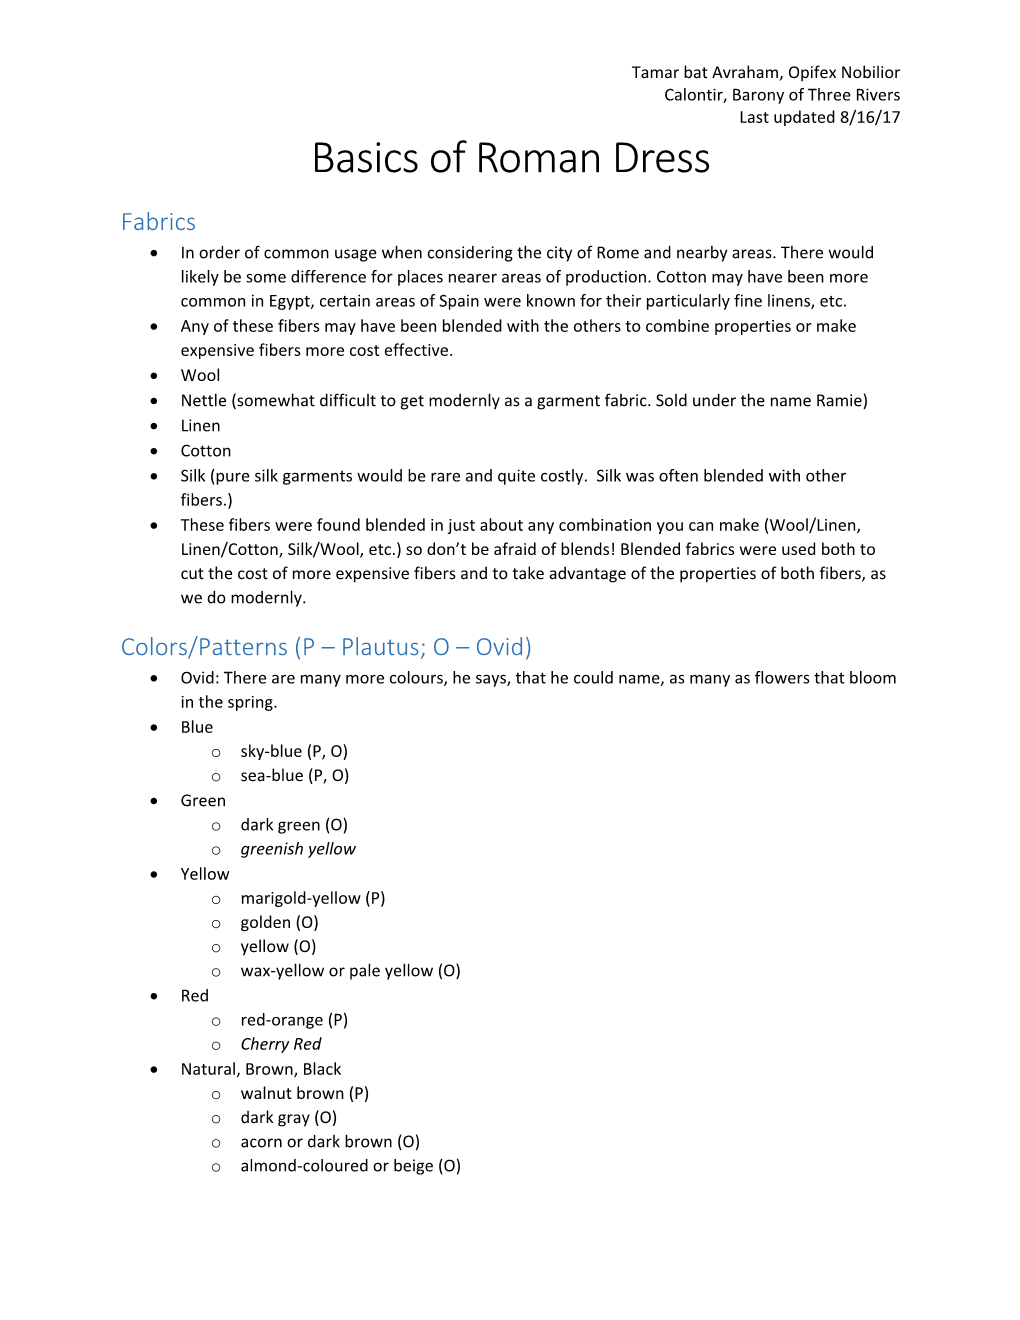 Basics of Roman Dress Fabrics  in Order of Common Usage When Considering the City of Rome and Nearby Areas